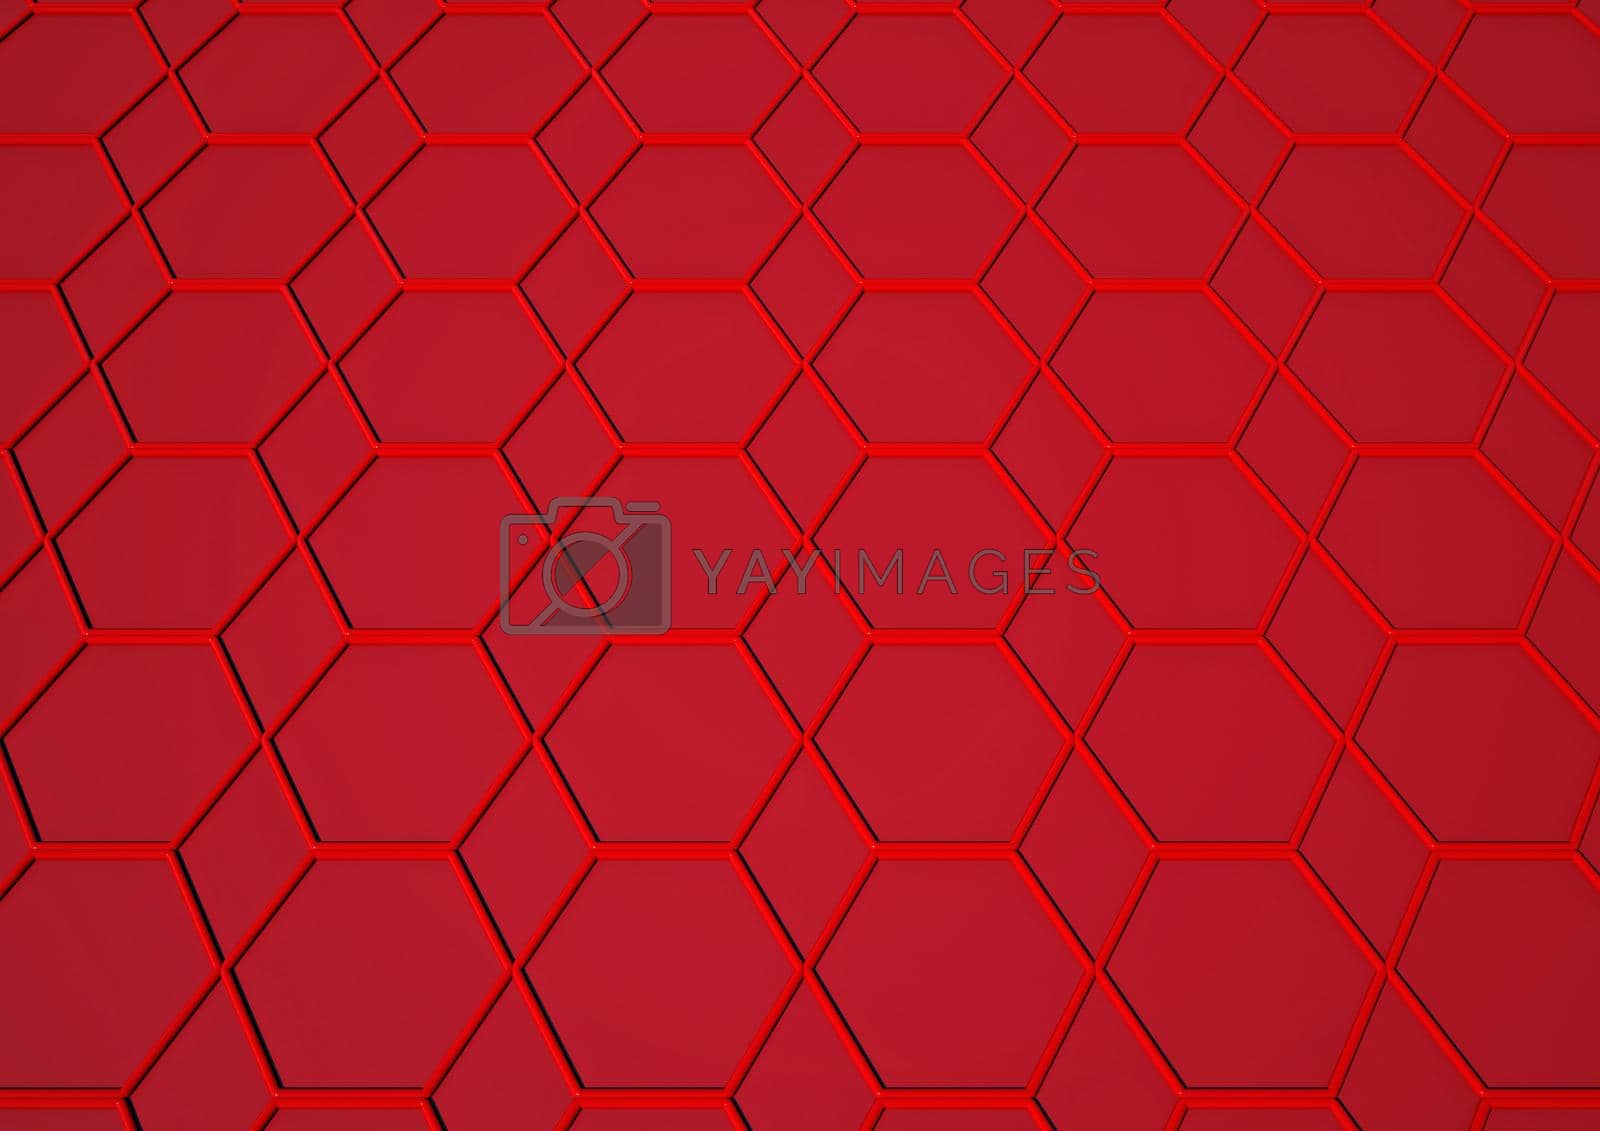 Royalty free image of Geometrical structure background. 3D rendering. by richter1910